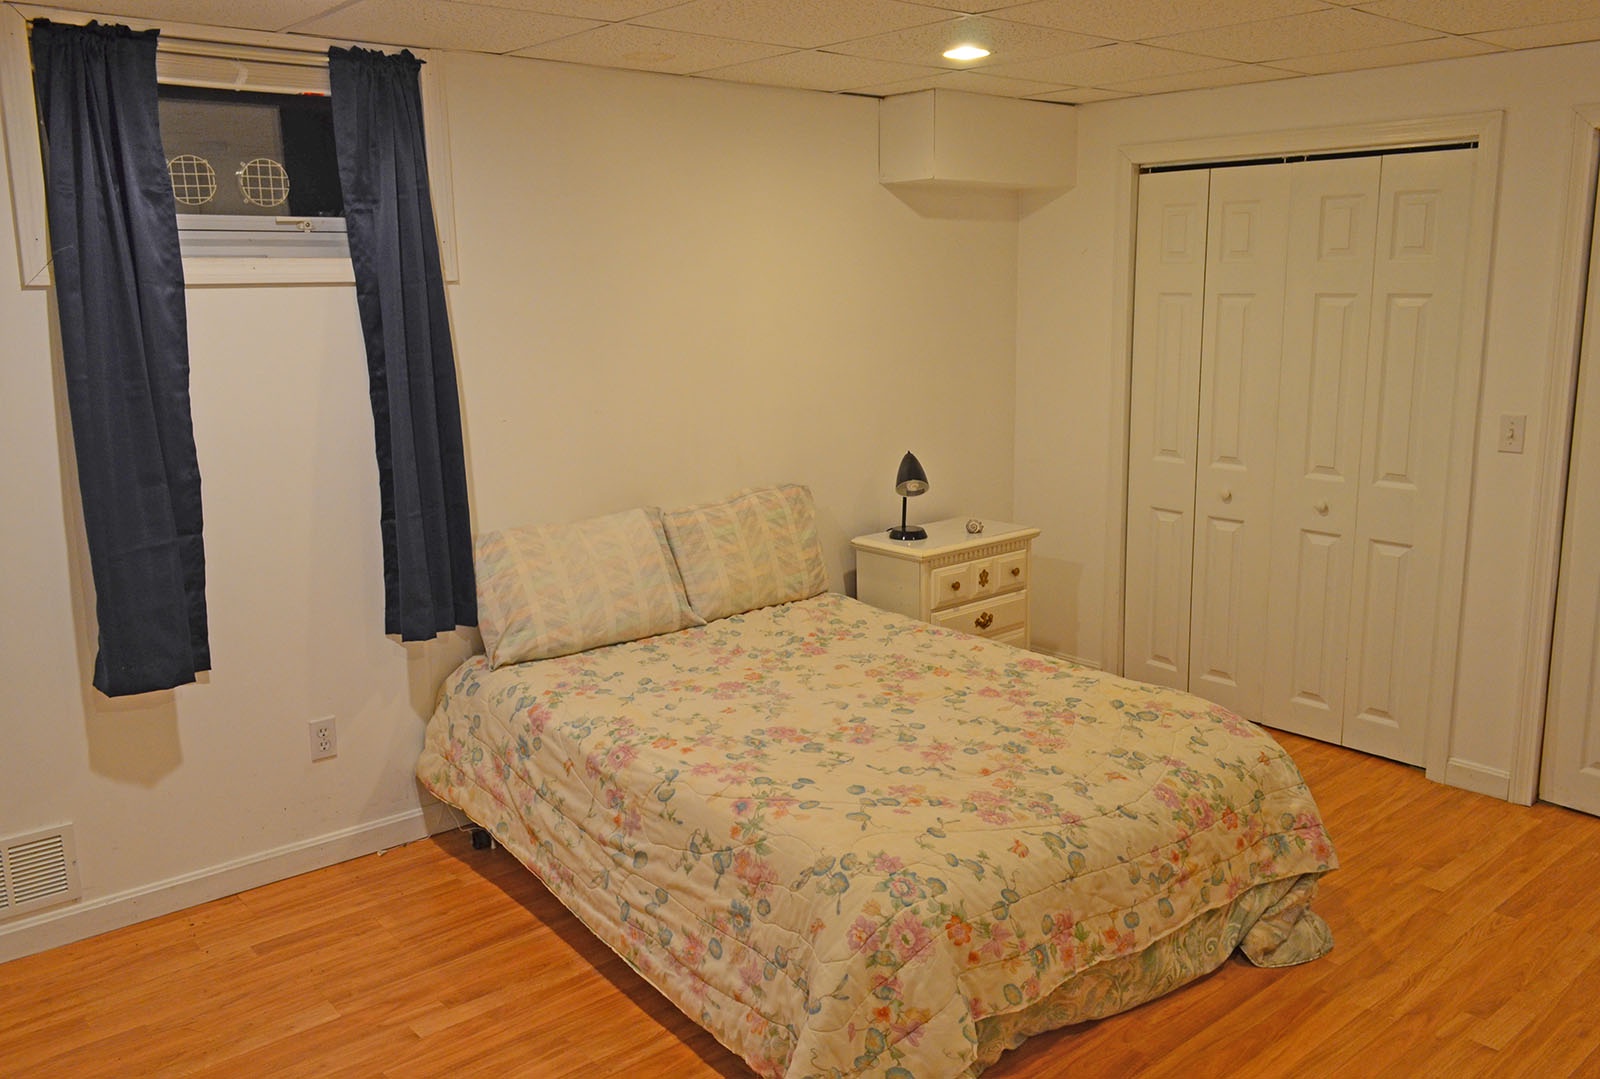 The spacious bedroom has a Full bed.